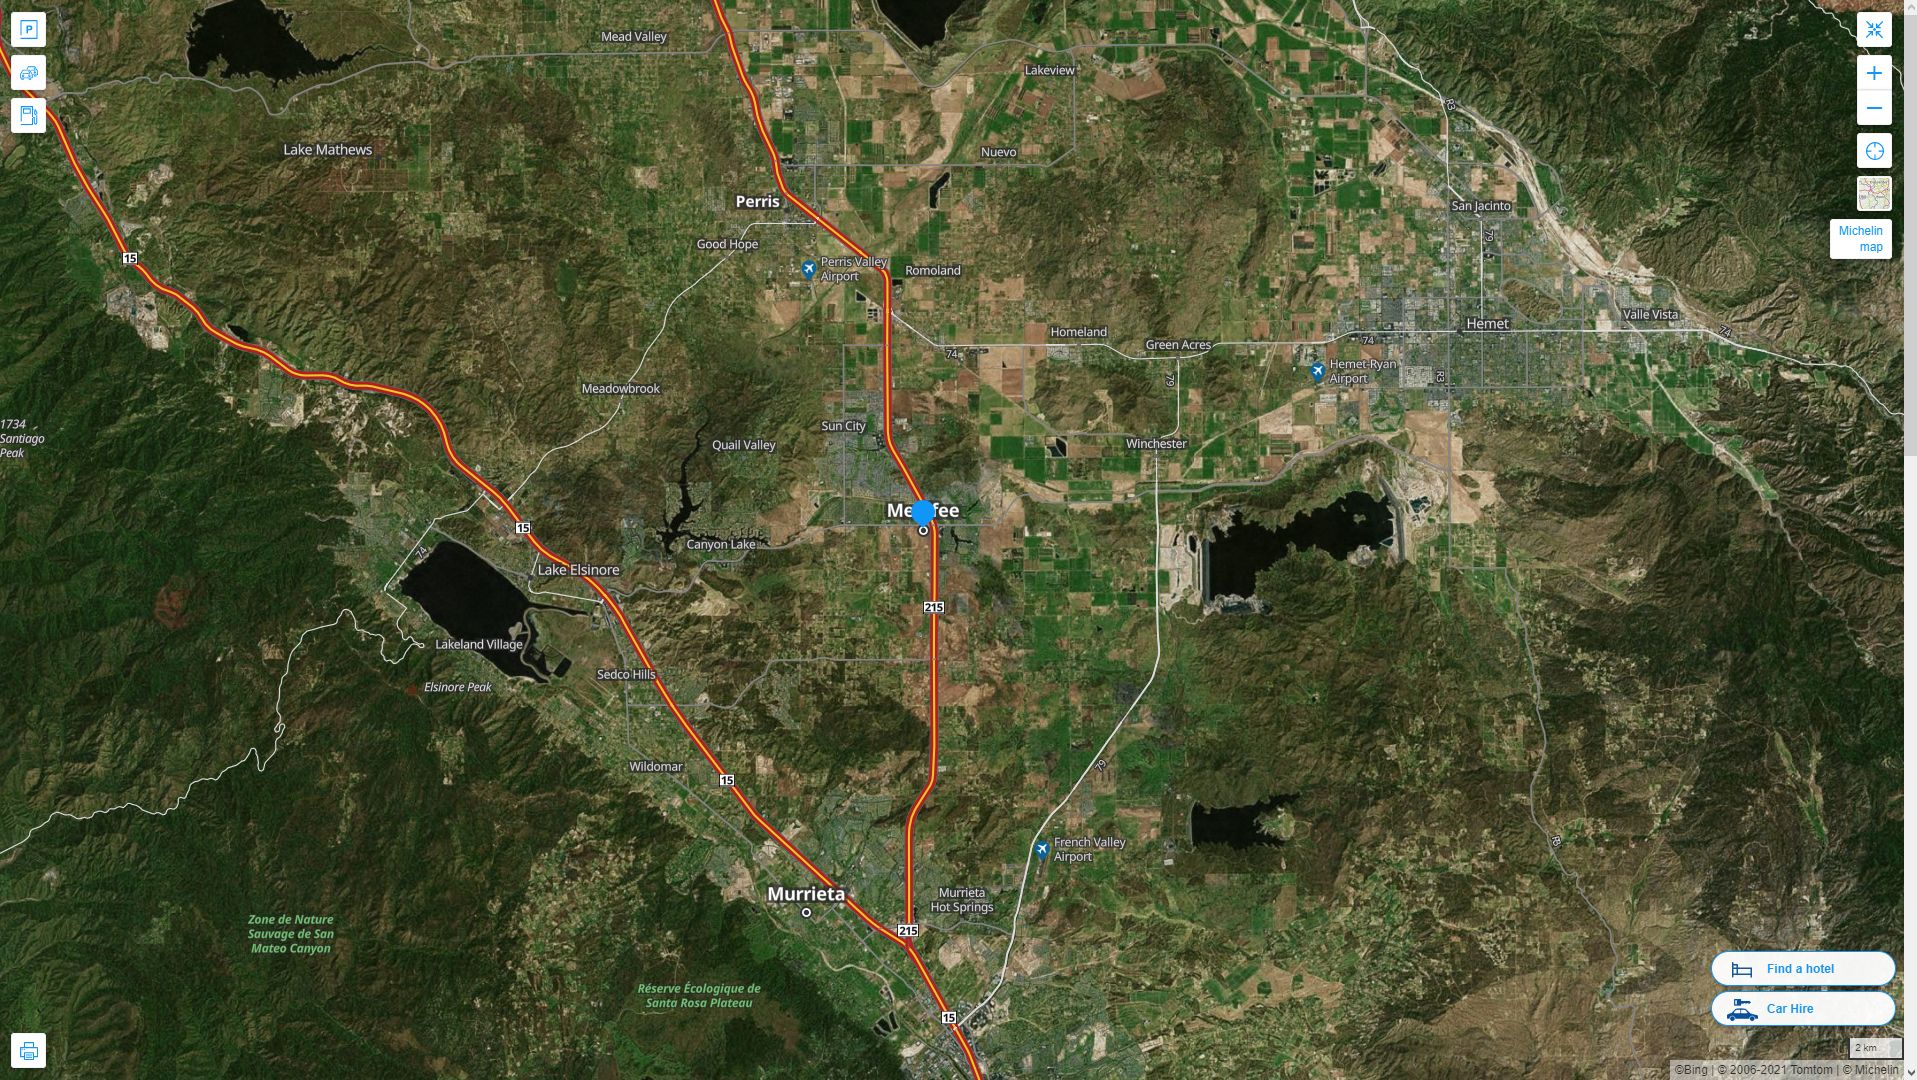 Menifee California Highway and Road Map with Satellite View